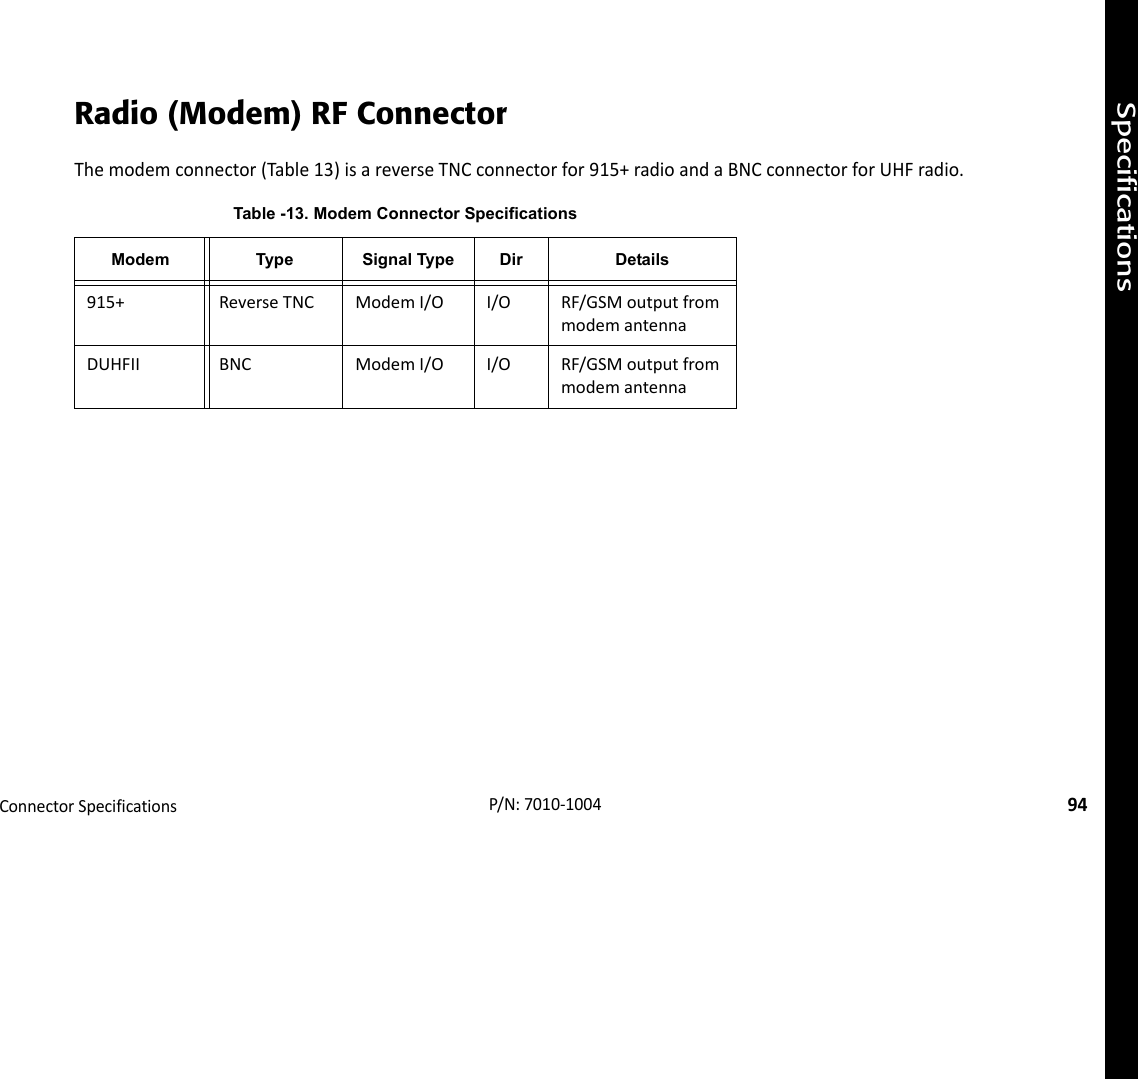 SpecificationsConnectorSpecifications94P/N:7010‐1004Radio (Modem) RF ConnectorThemodemconnector(Table13)isareverseTNCconnectorfor915+radioandaBNCconnectorforUHFradio.Table -13. Modem Connector SpecificationsModem Type Signal Type Dir Details915+ ReverseTNC ModemI/O I/O RF/GSMoutputfrommodemantennaDUHFII BNC ModemI/O I/O RF/GSMoutputfrommodemantenna